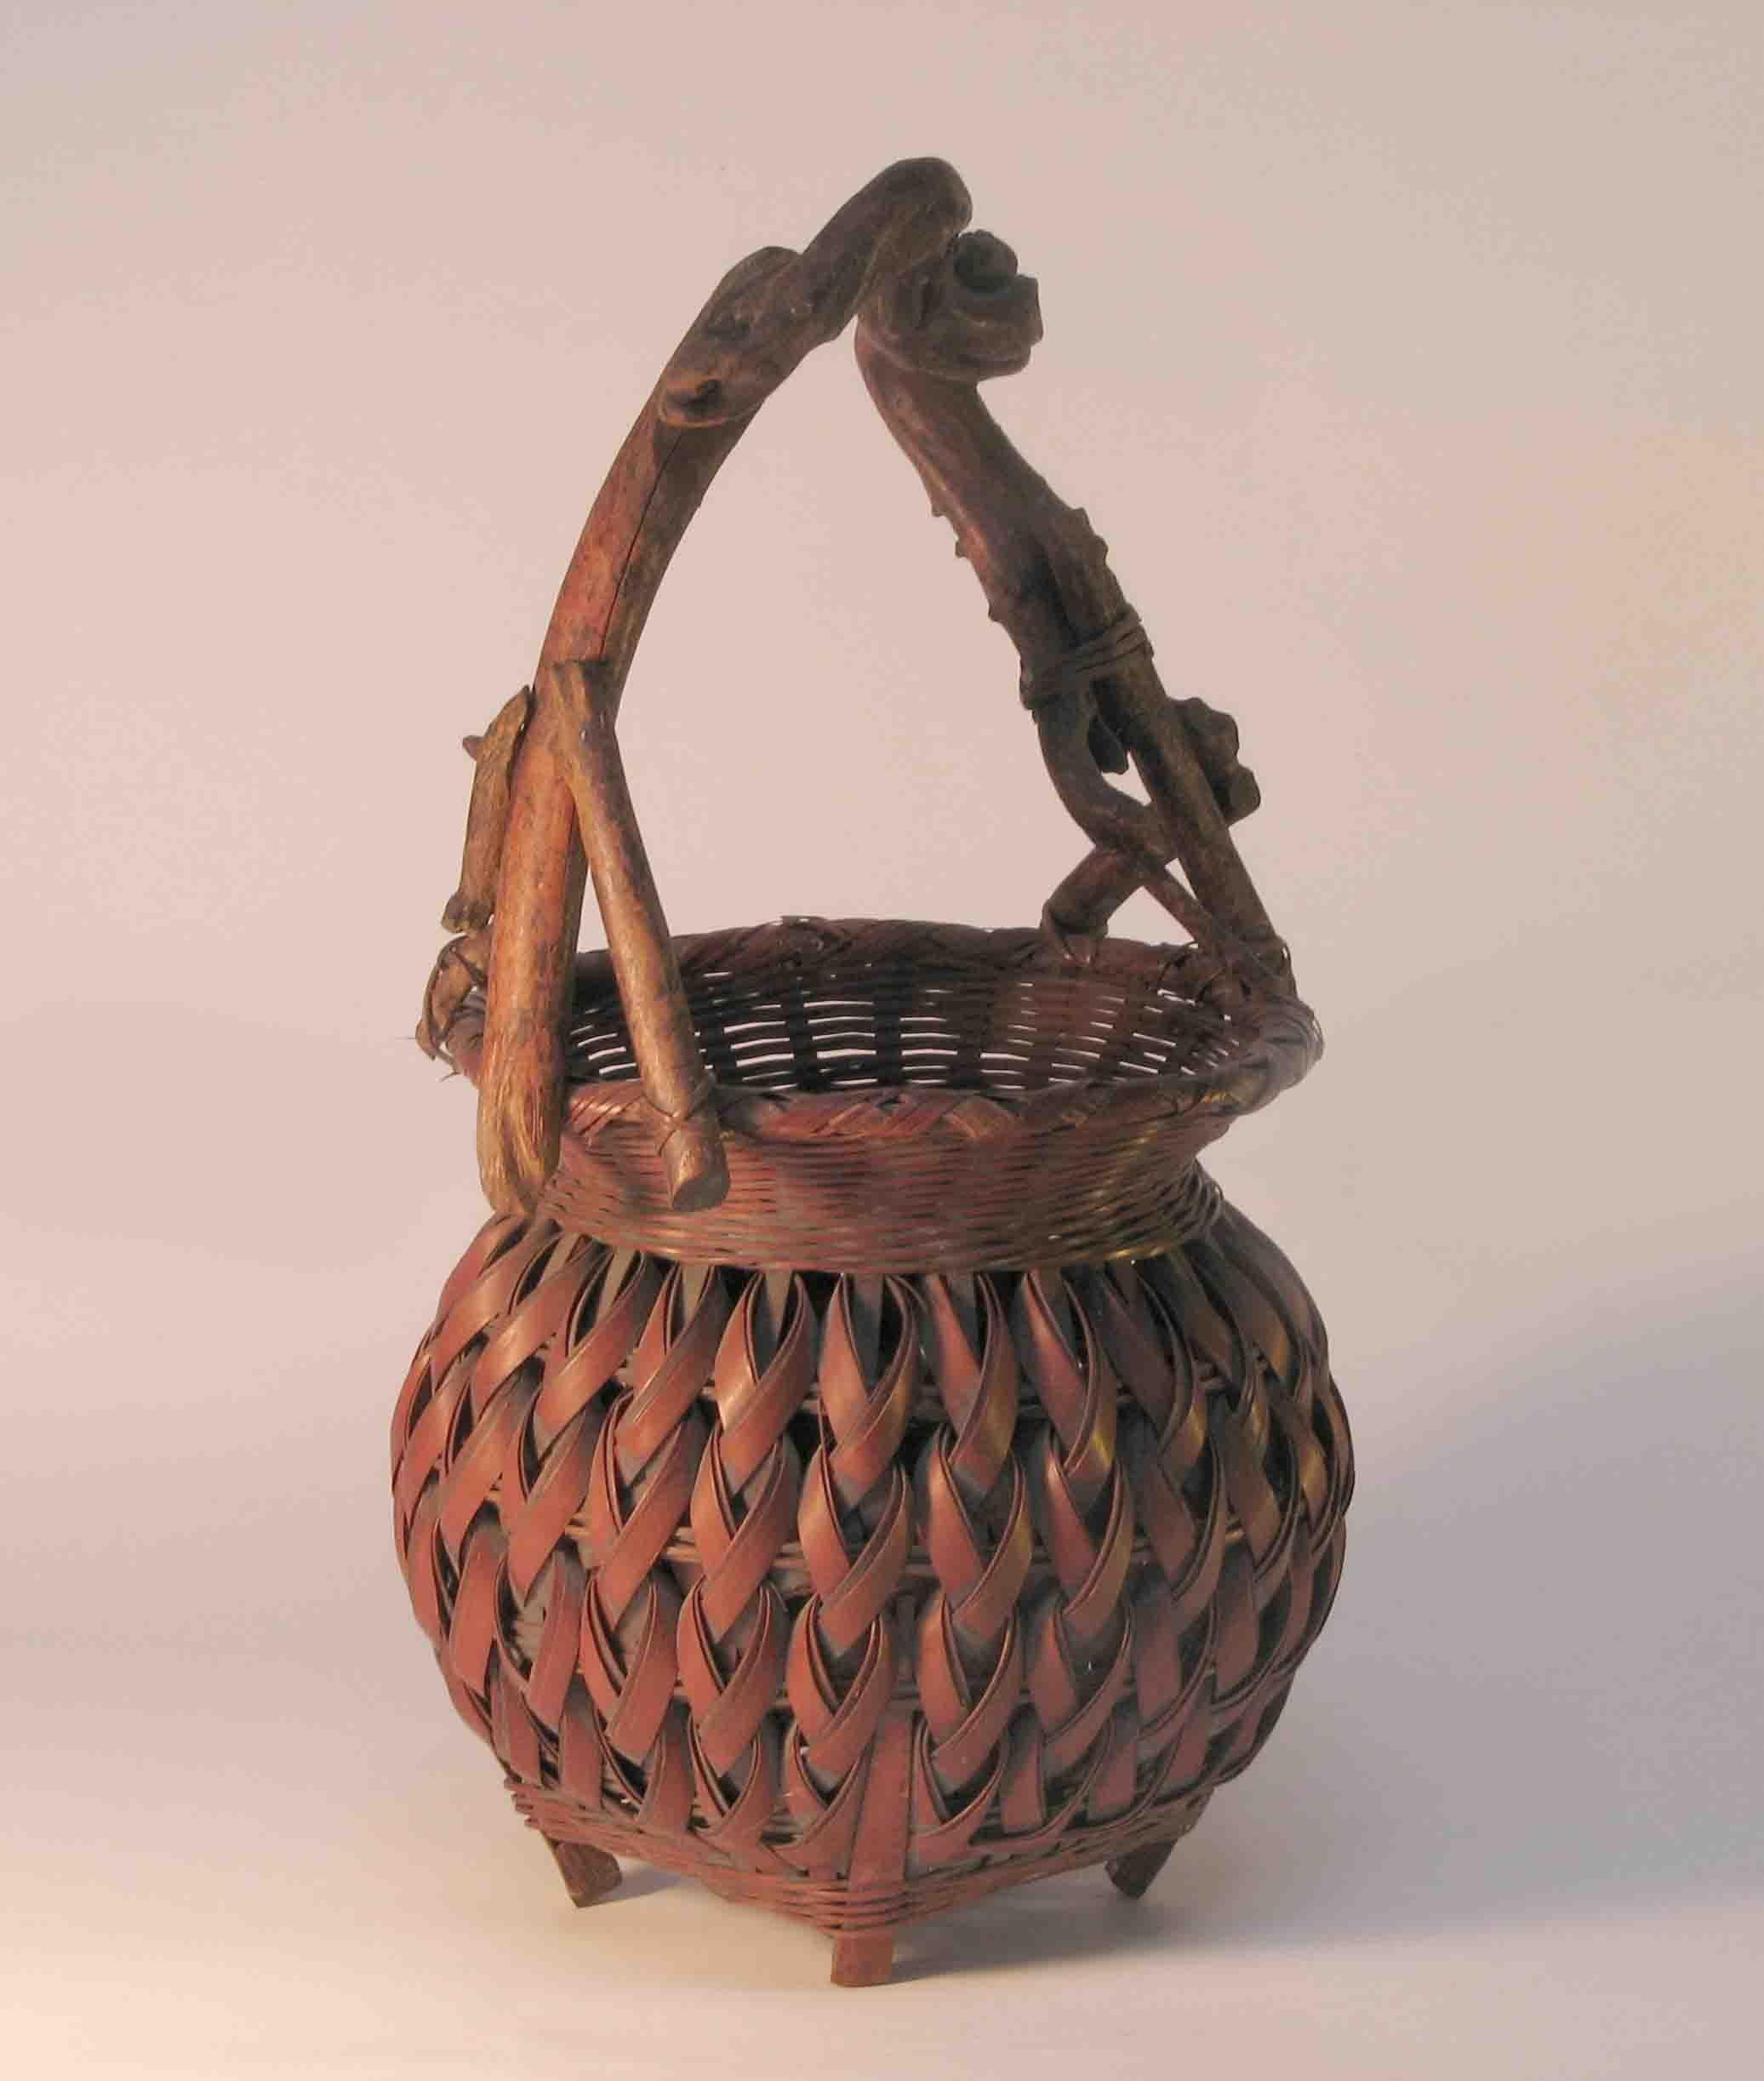 Japanese Woven Bamboo Ikebana Flower Basket In Good Condition For Sale In Ottawa, Ontario